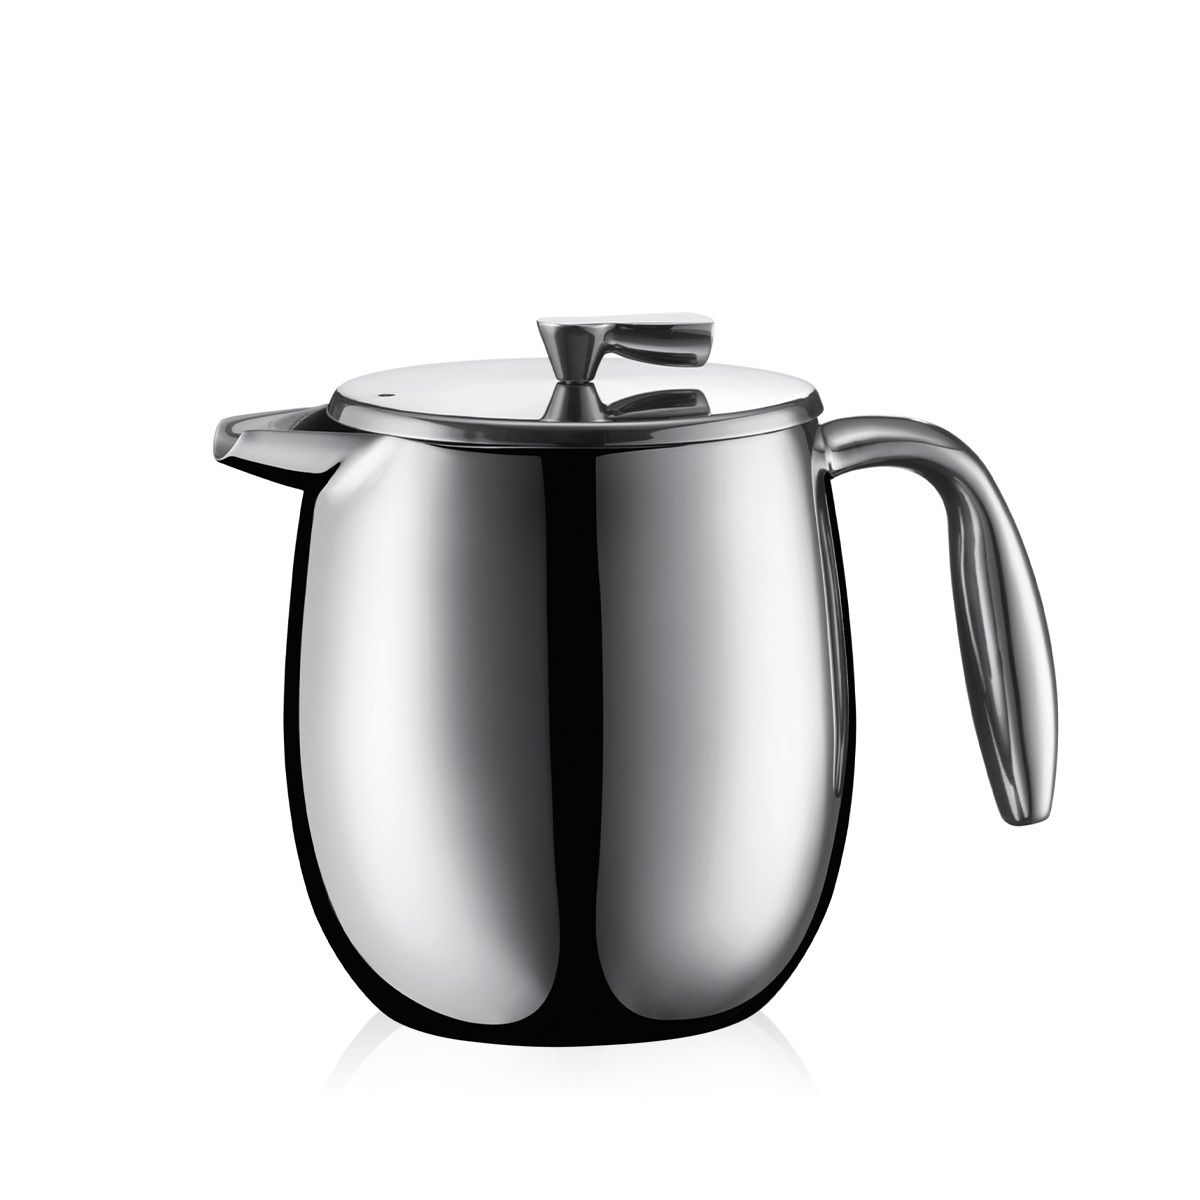 Bodum French Press 4 Cup Coffee Maker Stainless - 11055-16